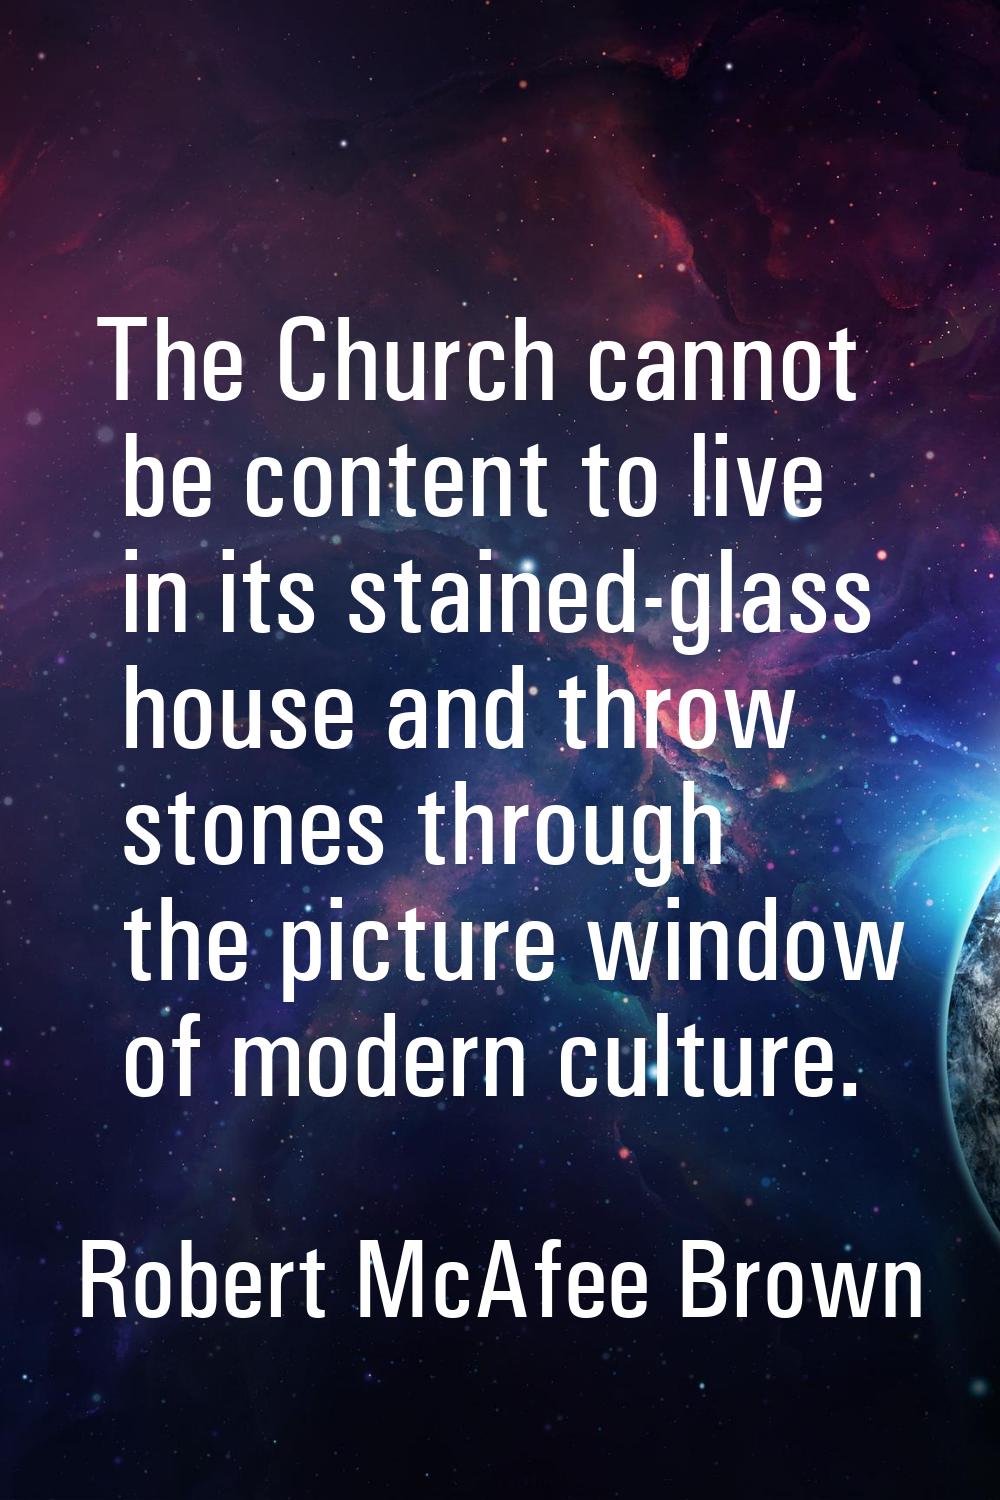 The Church cannot be content to live in its stained-glass house and throw stones through the pictur